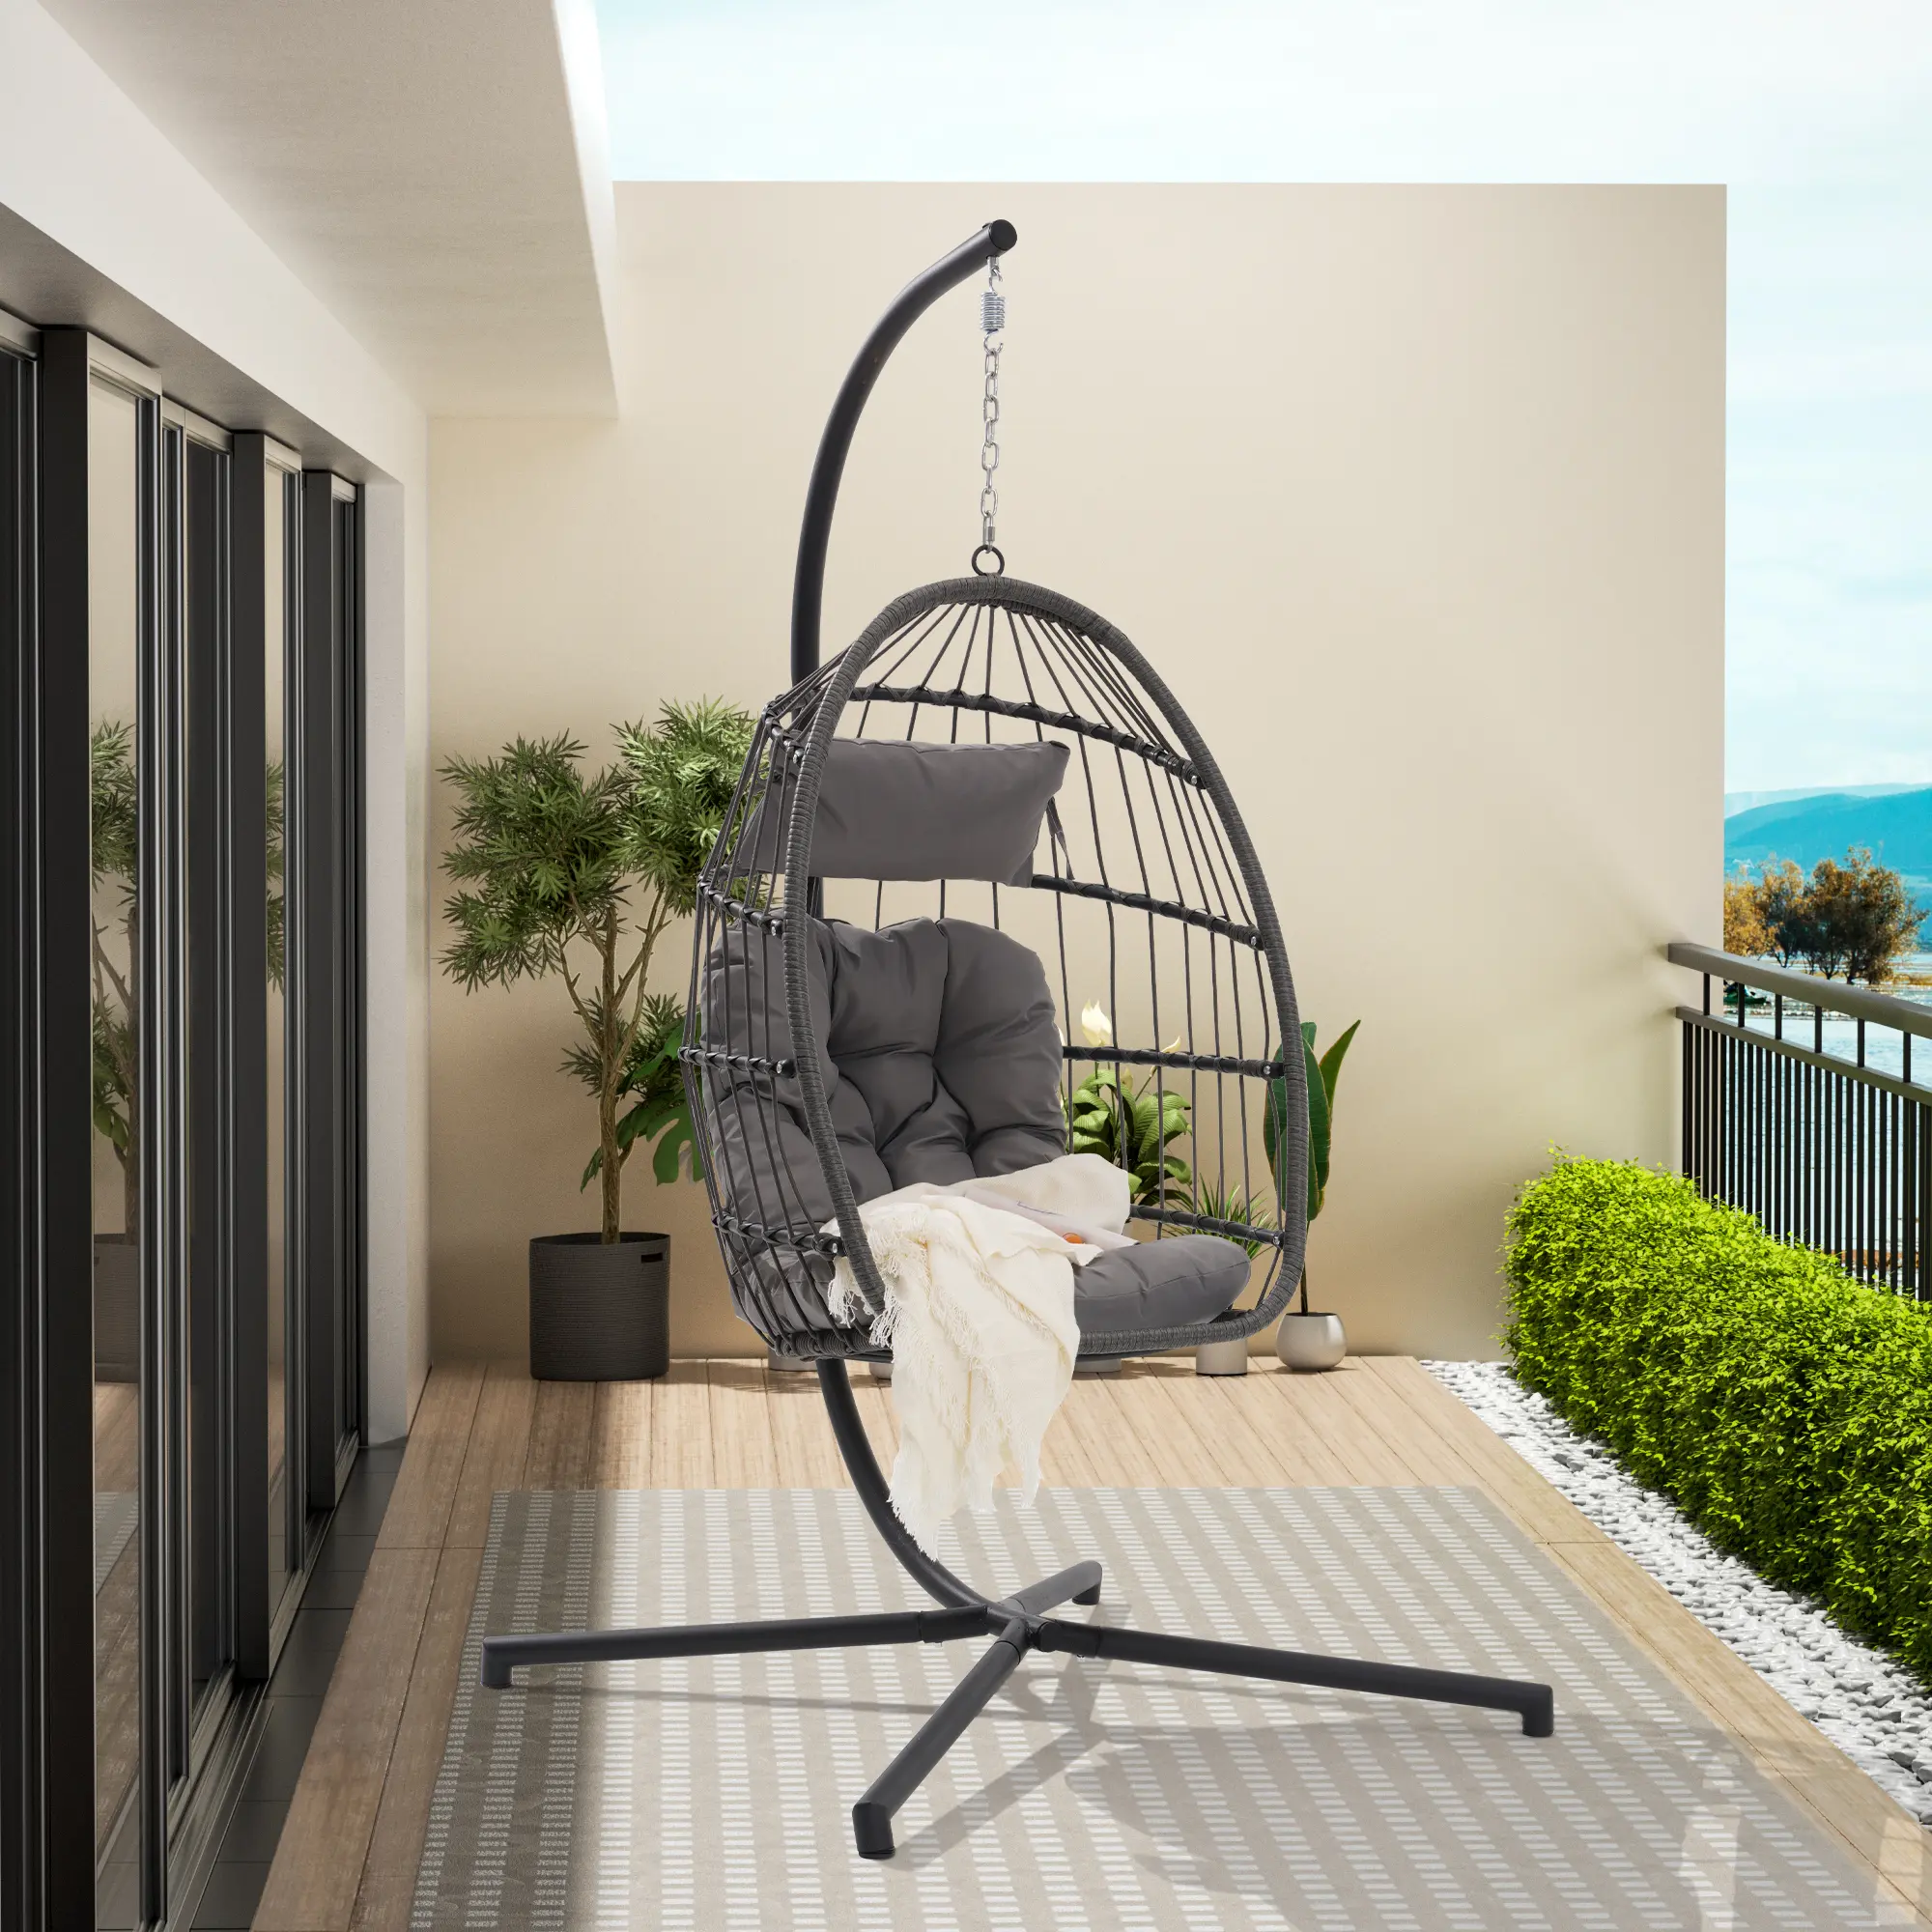 Outdoor Garden Wicker Swing Egg Chair Folding Hanging Chair with Gray Cushions